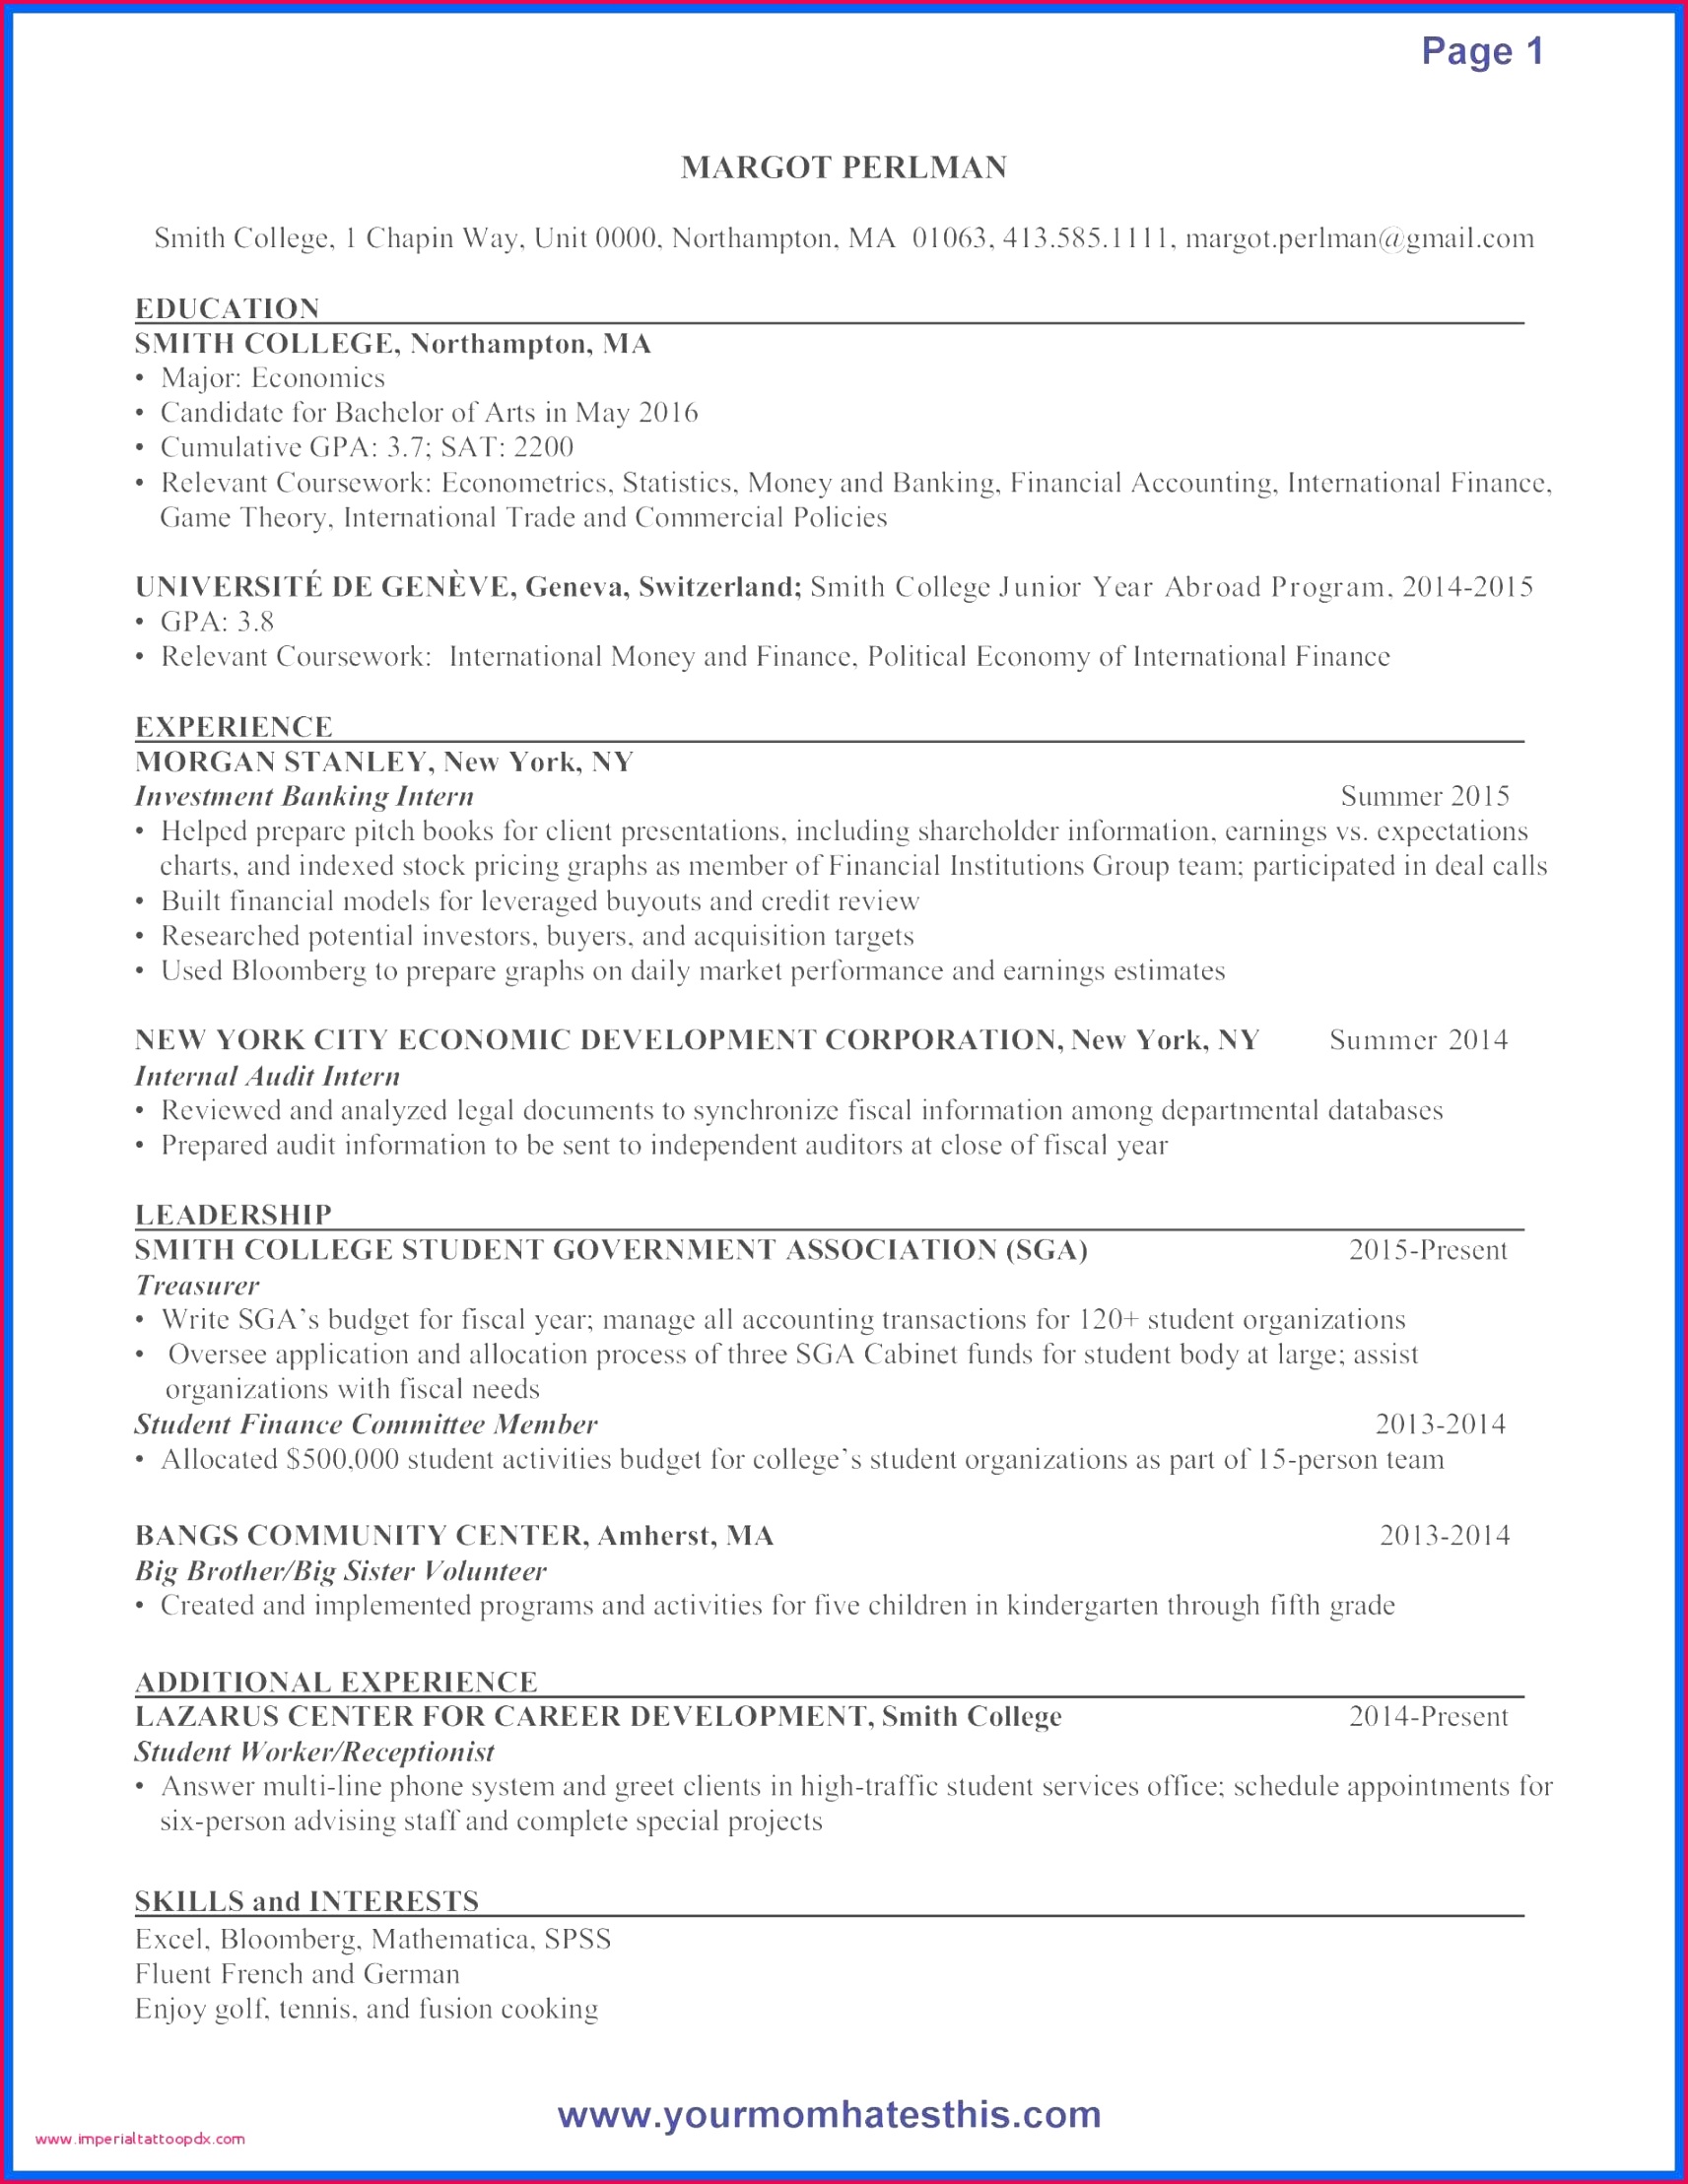 Cv Structure Template Unique Big W Resume Example Inspirational Writing A Great Resume Unique Cv